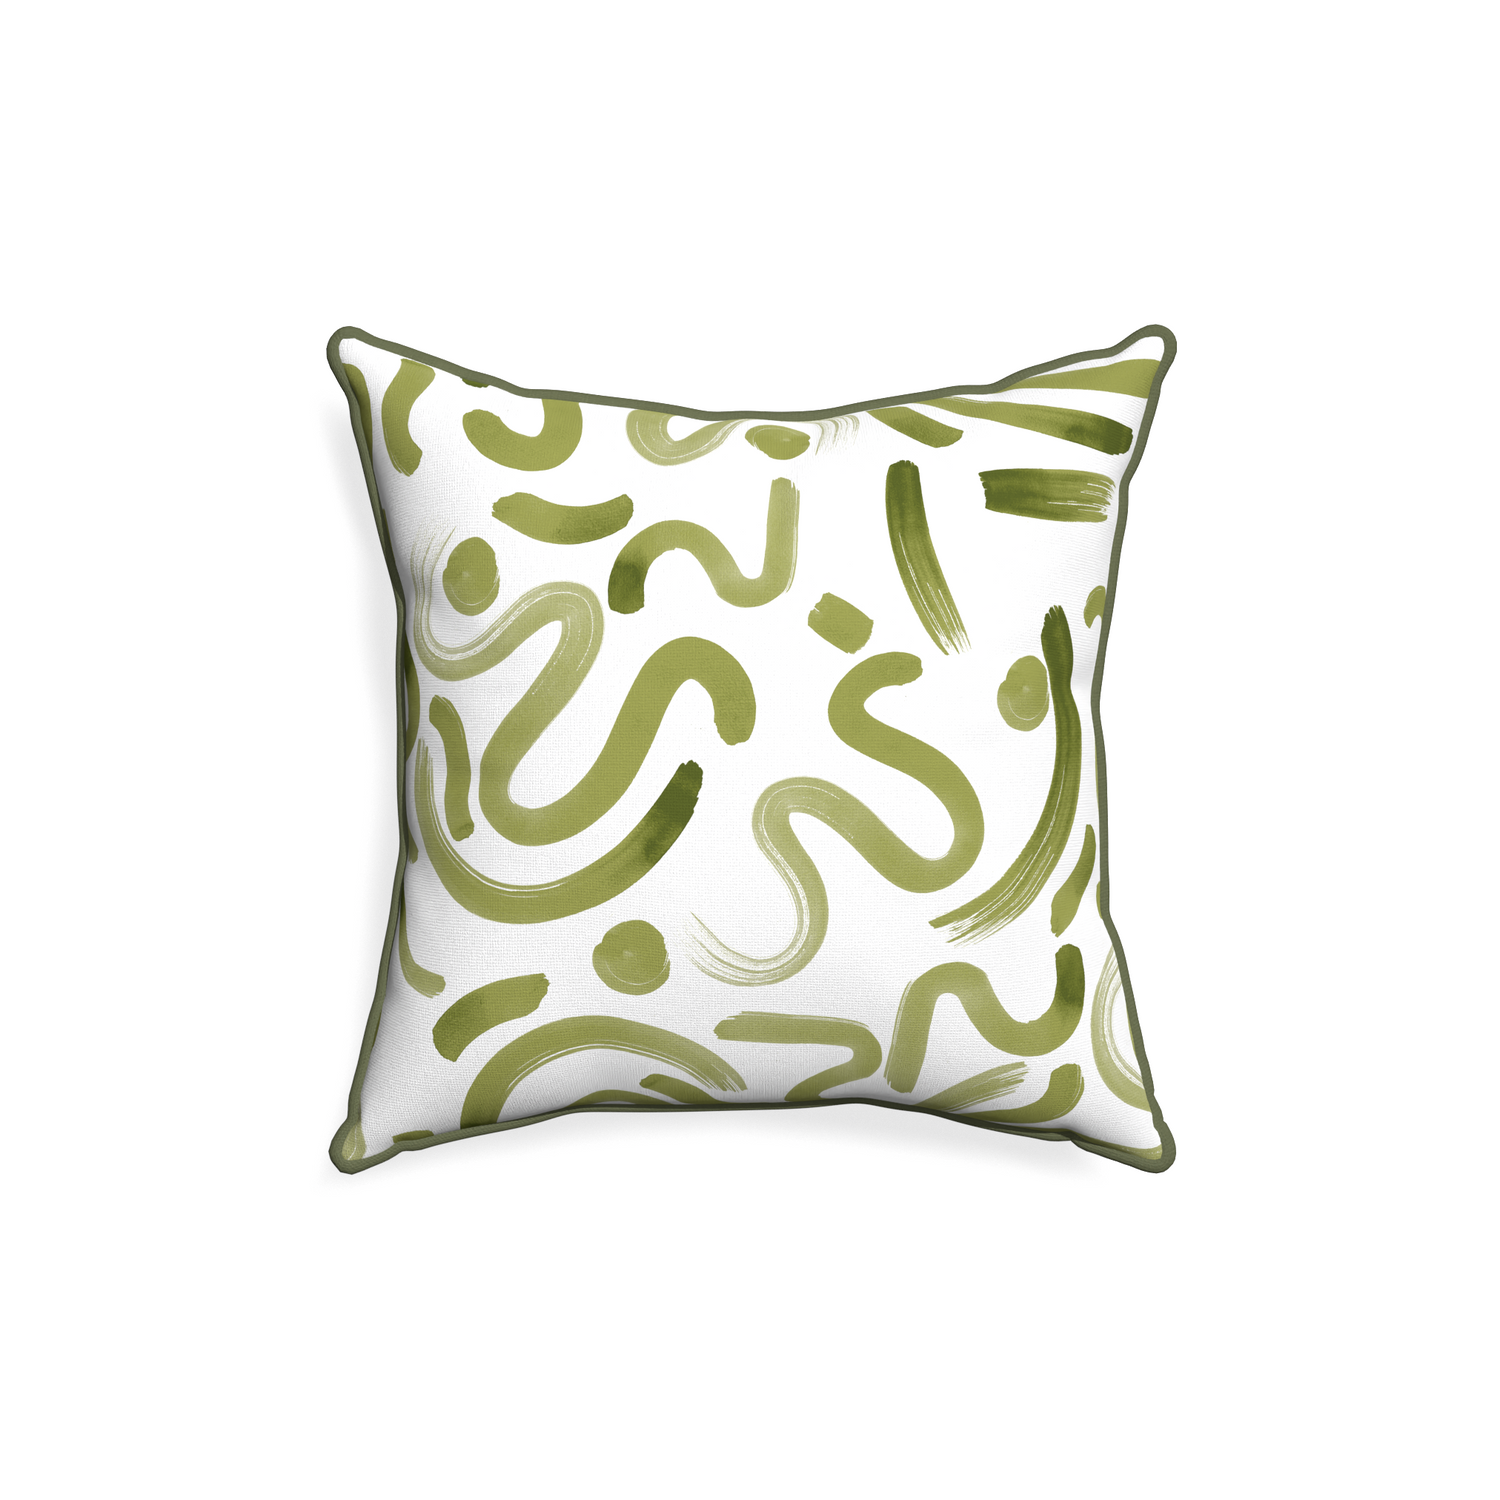 18-square hockney moss custom pillow with f piping on white background